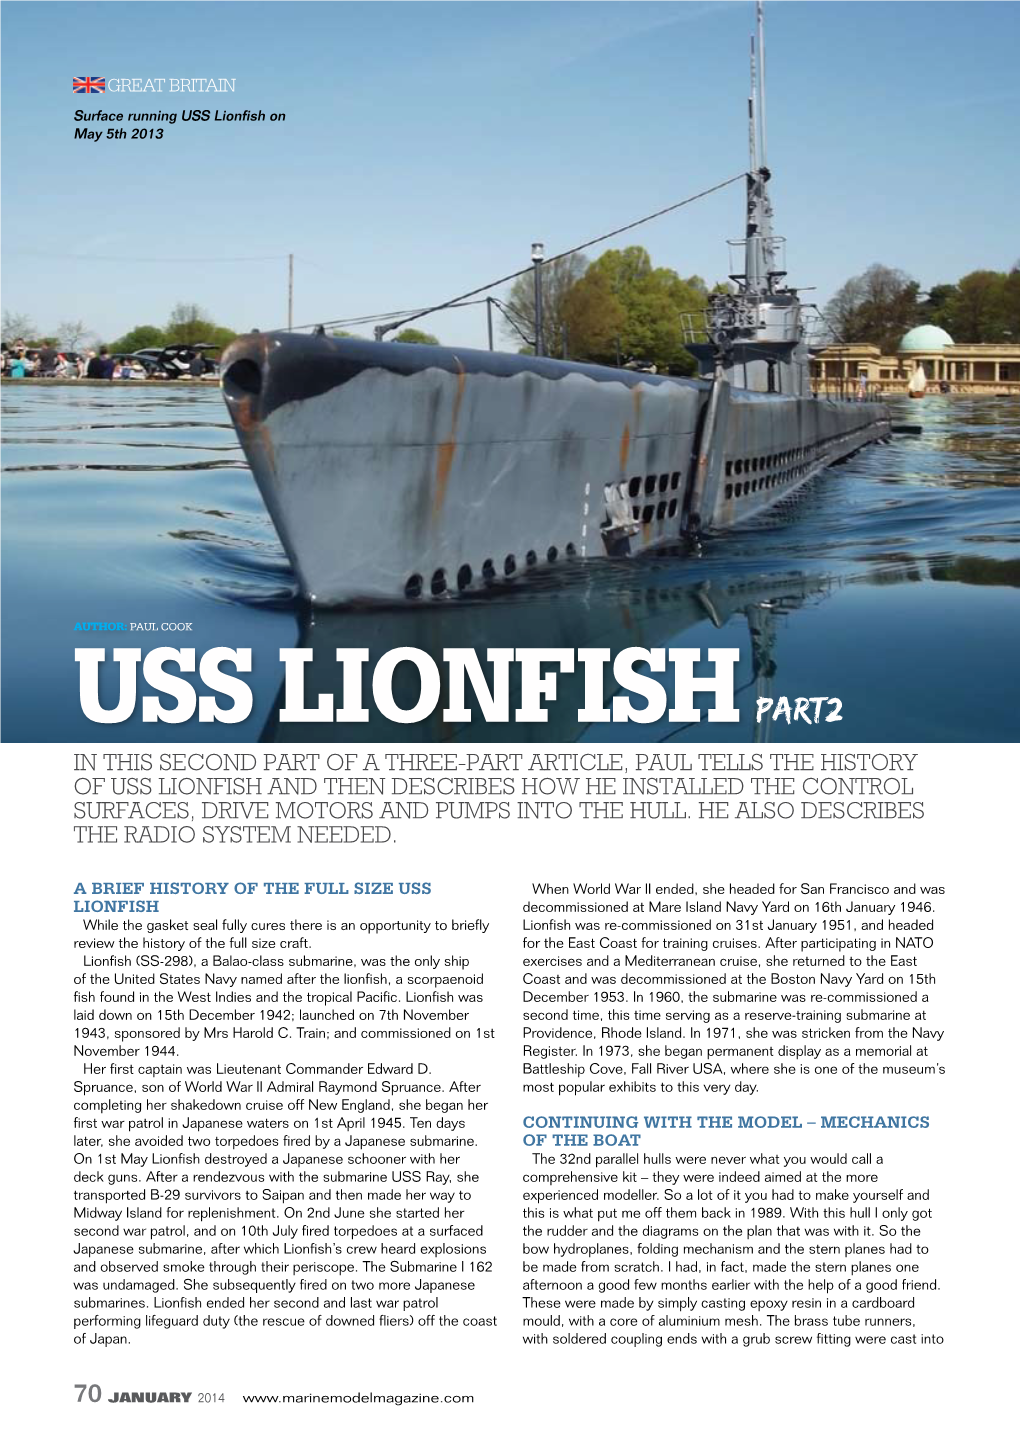 USS Lionfish on May 5Th 2013